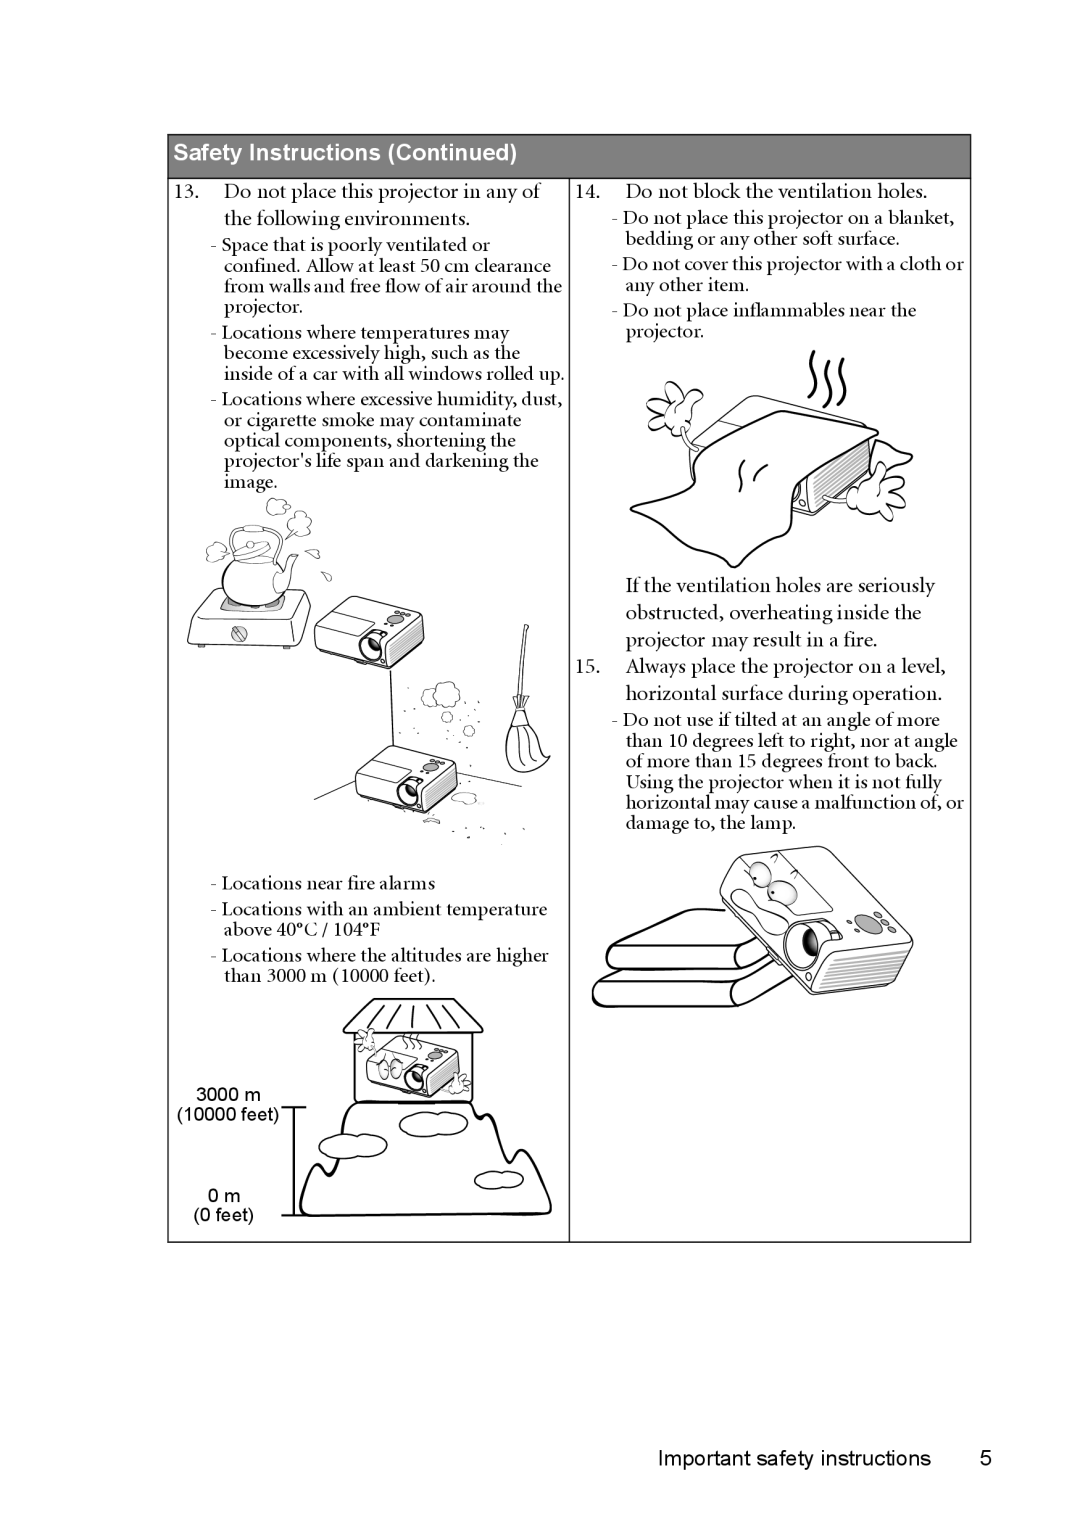 BenQ MX511 user manual Safety Instructions Continued, Do not place this projector in any of the following environments 